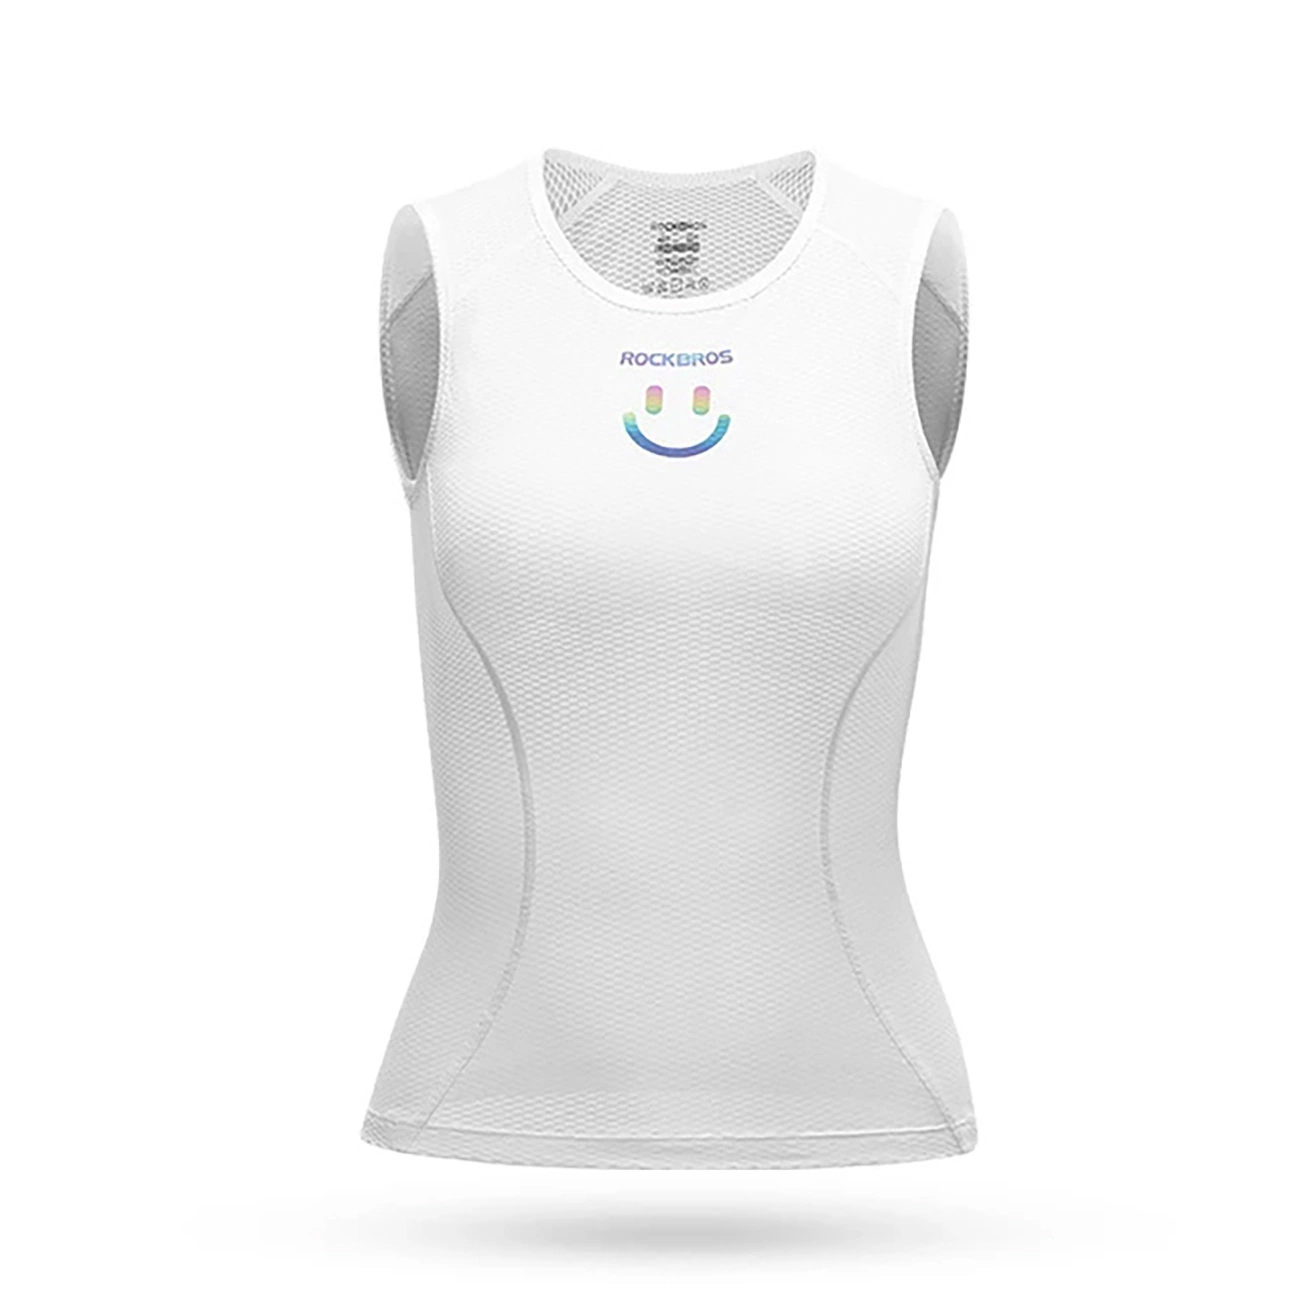 Rockbros YDBX001 women's quick-drying cycling vest on a white background